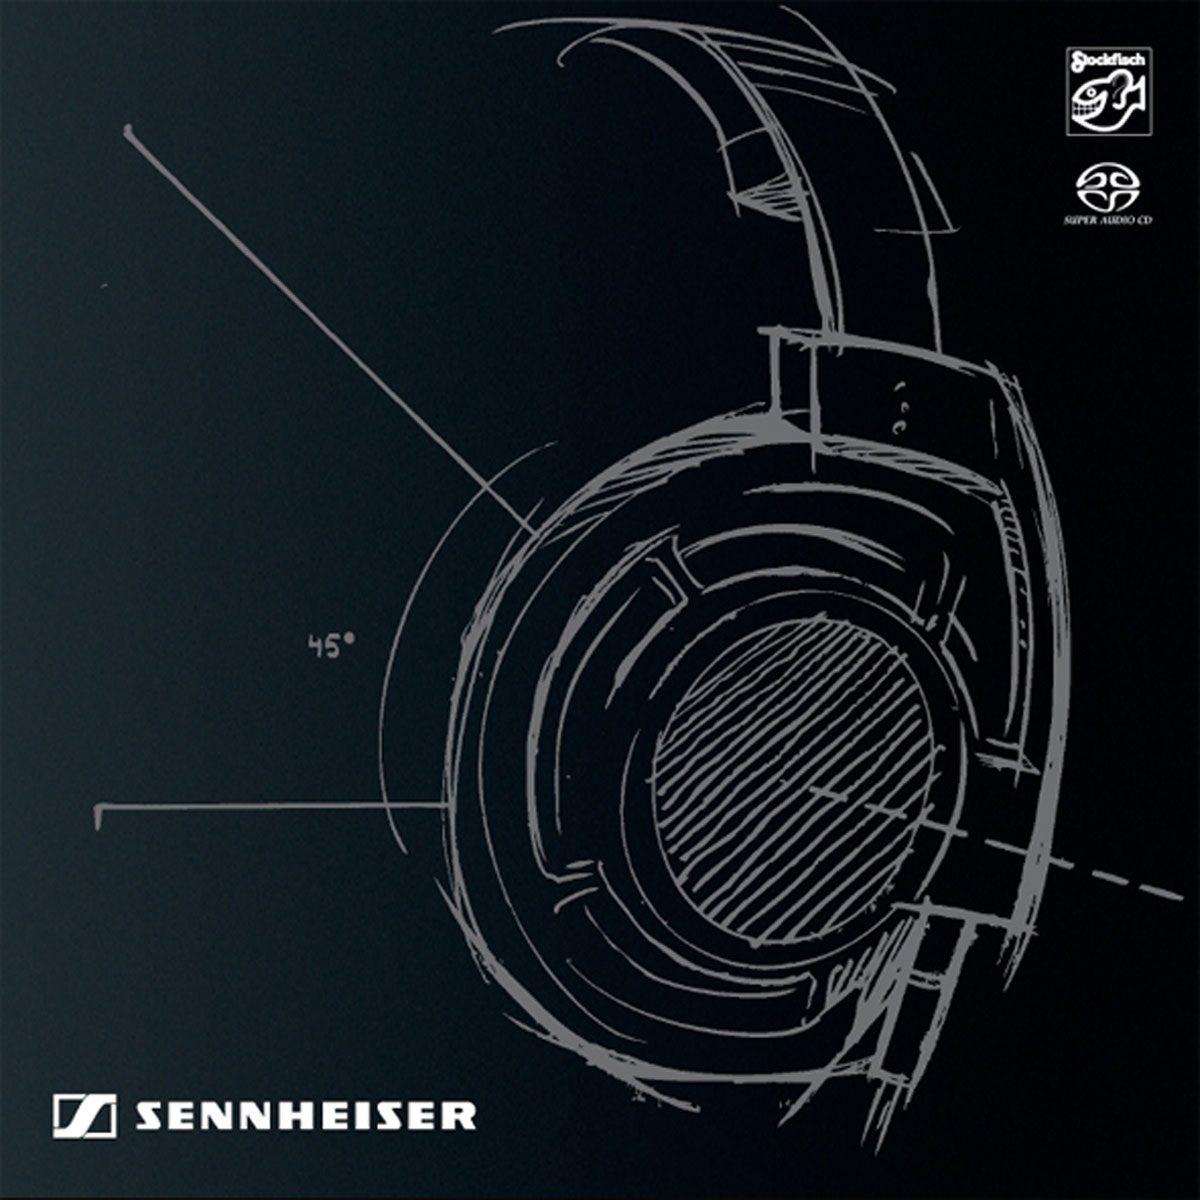 Sennheiser HD 800 - Crafted For Perfection